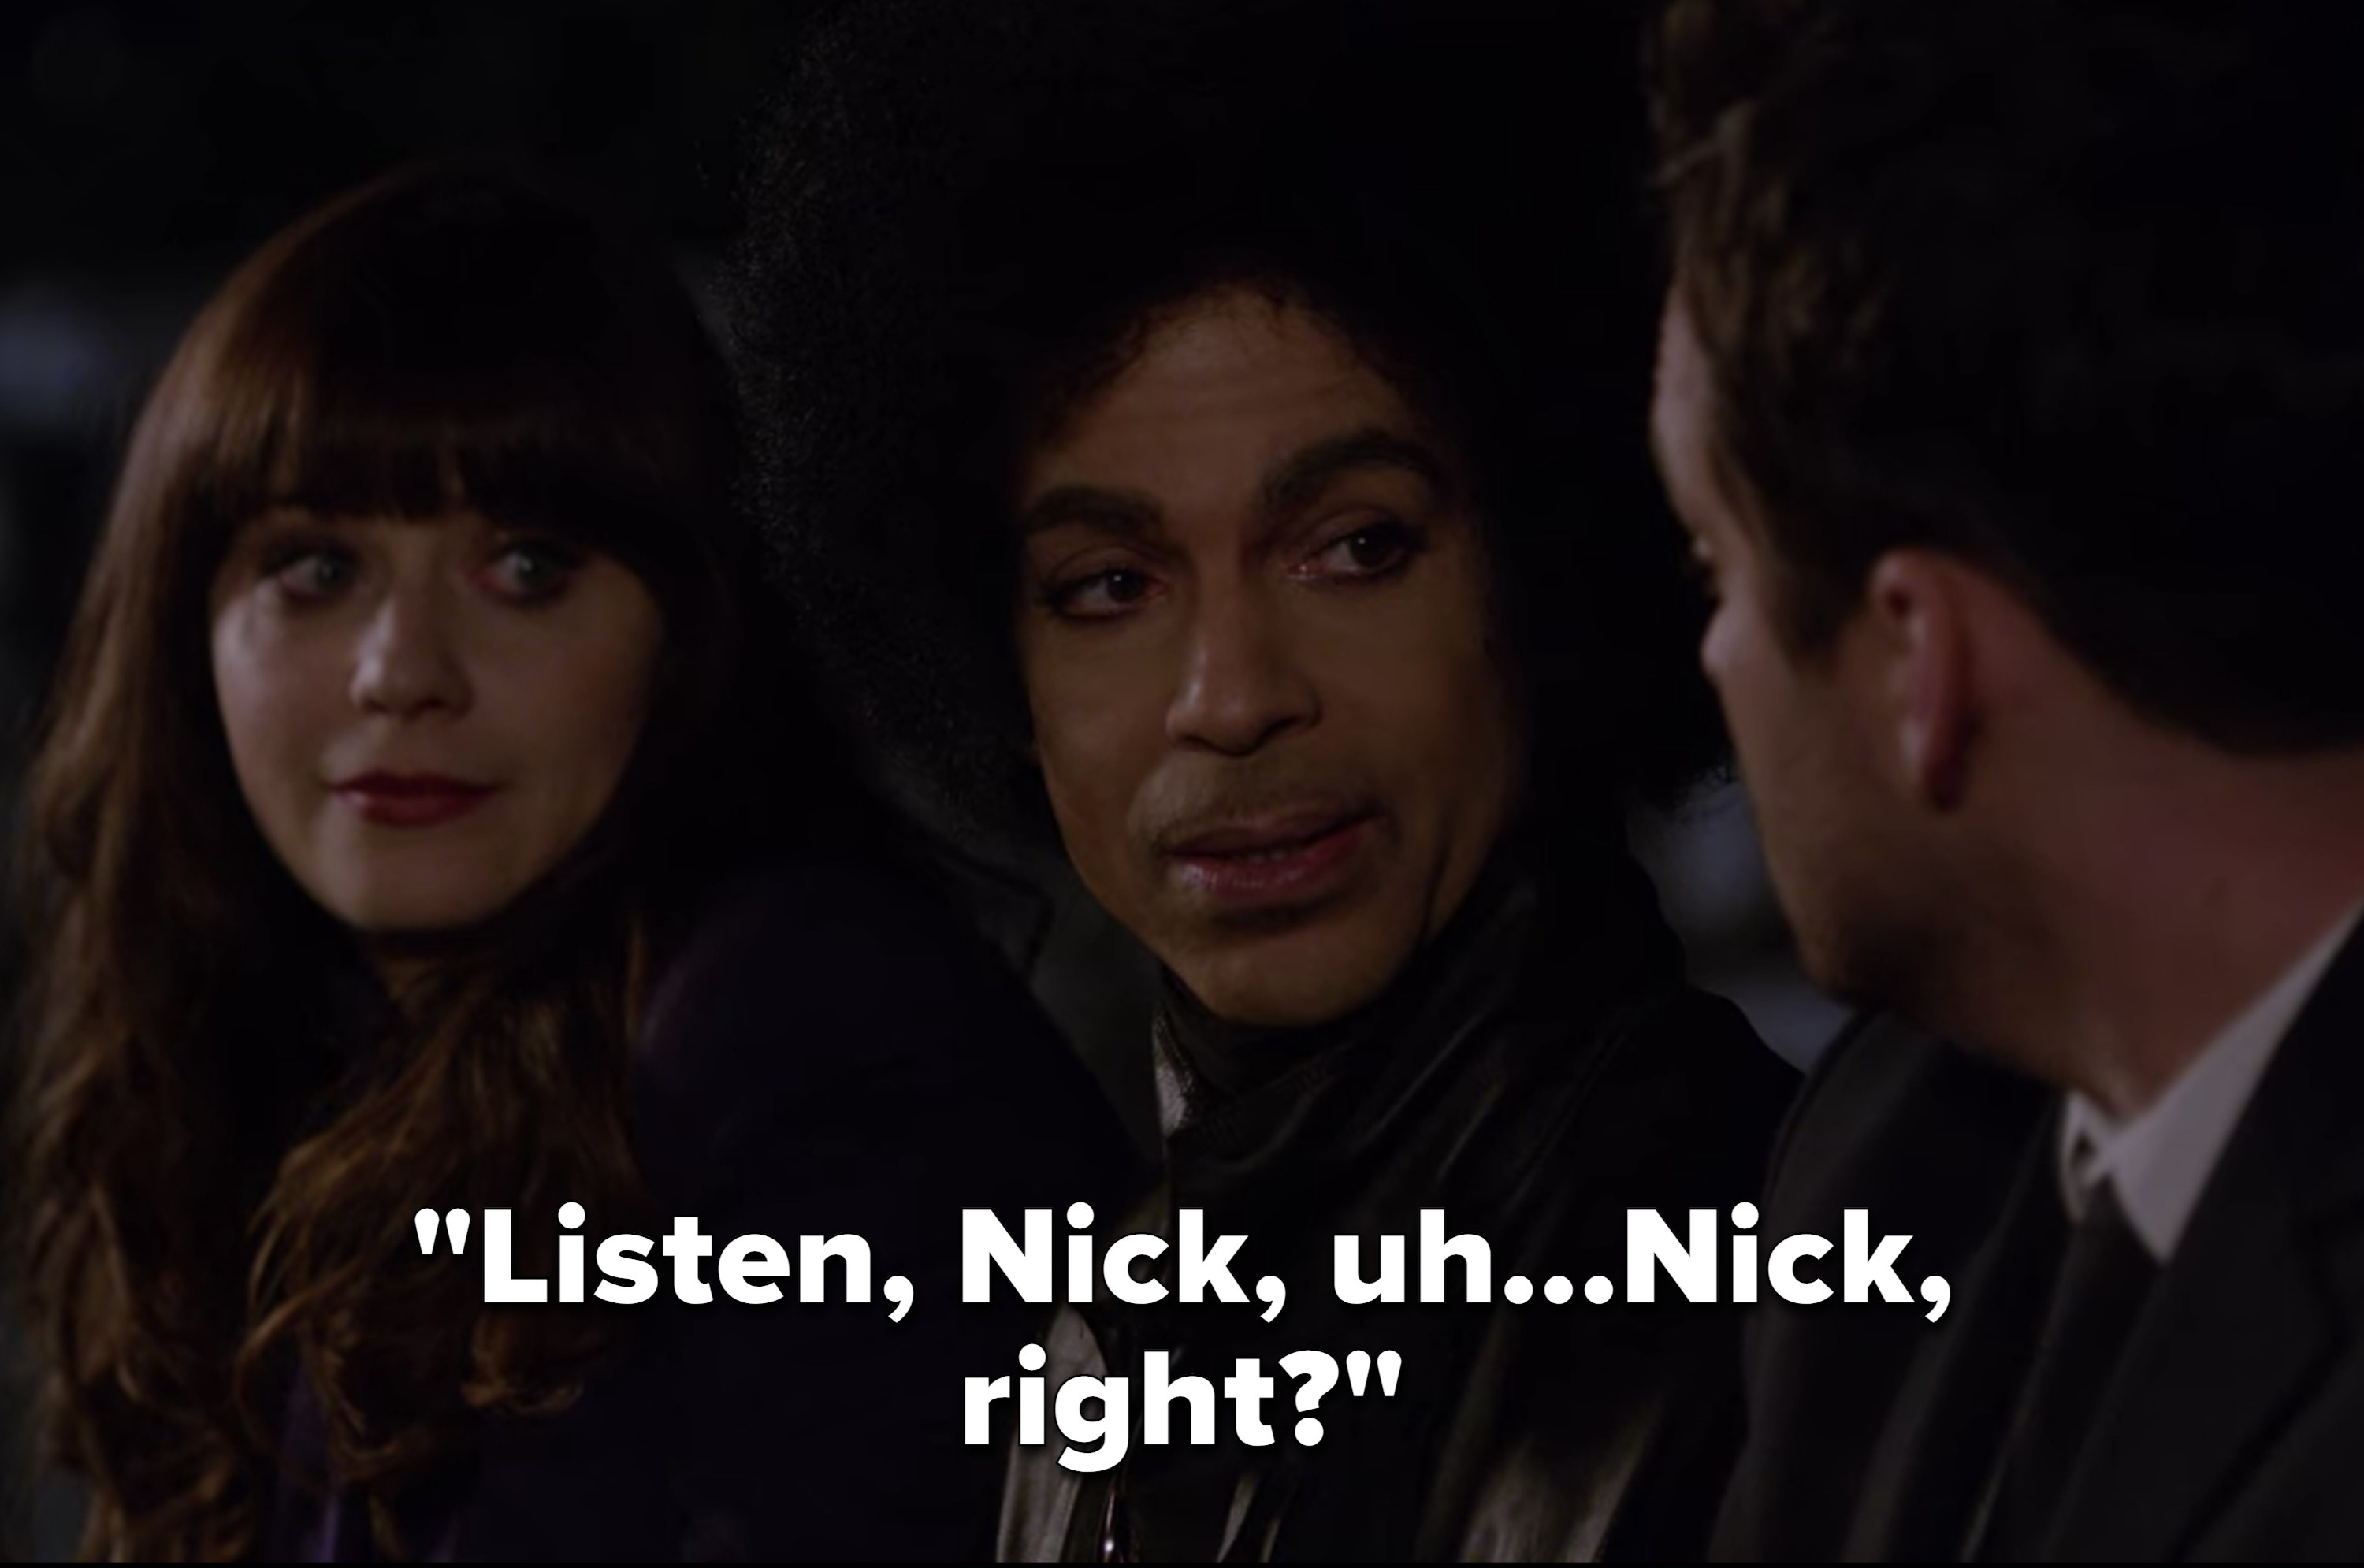 Prince says, &quot;Listen, Nick...uh, Nick, right?&quot; to Nick in the episode